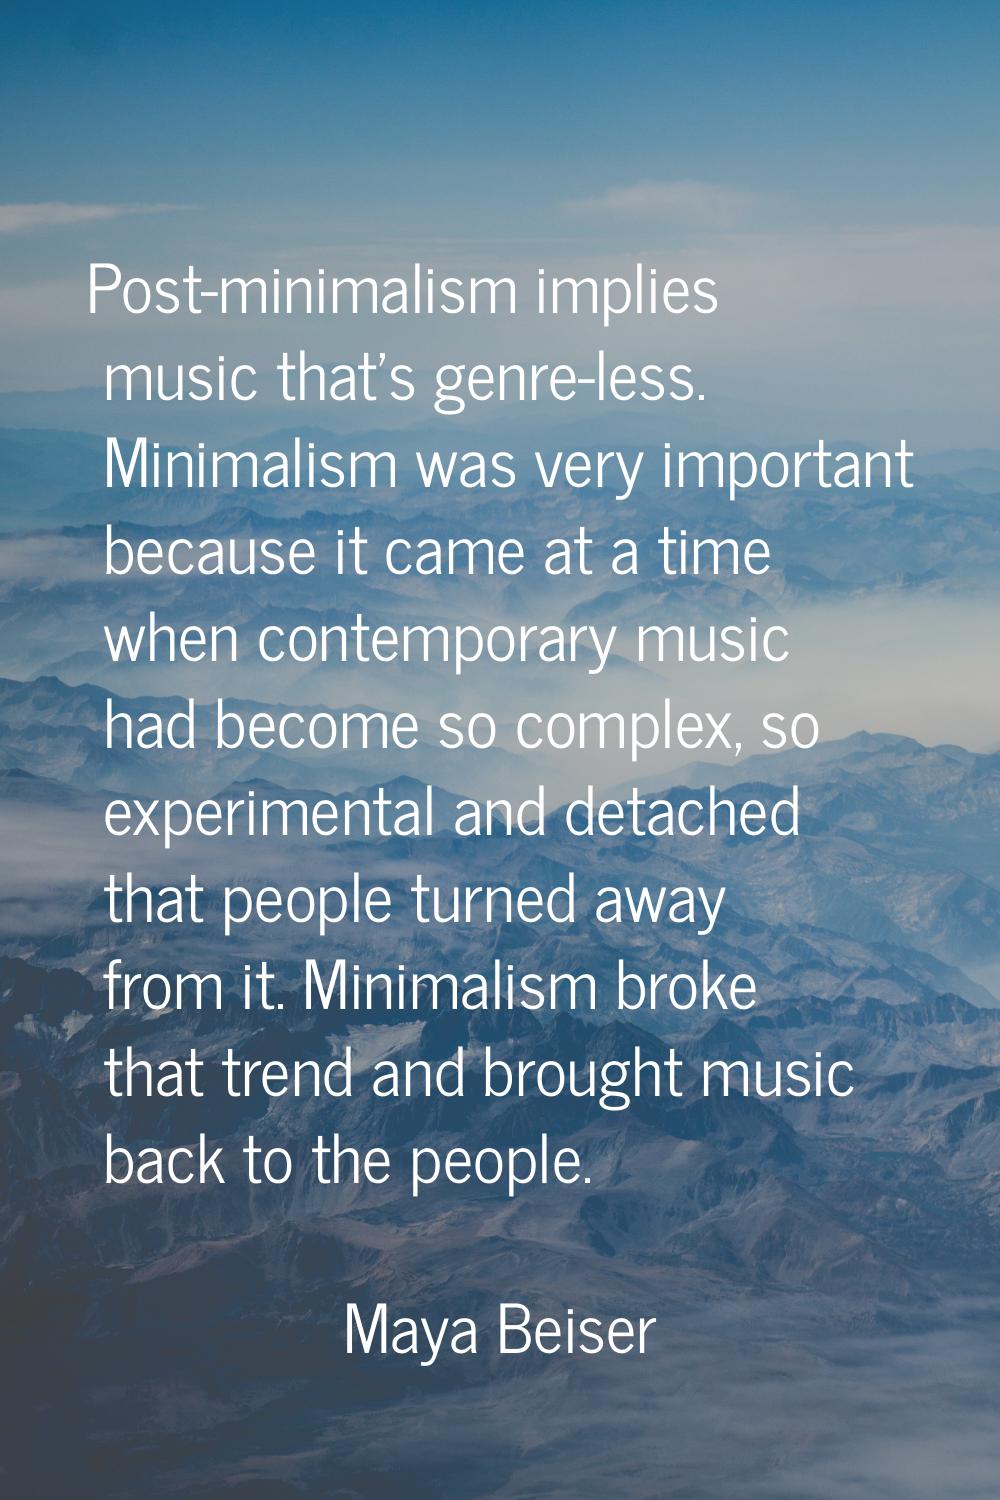 Post-minimalism implies music that's genre-less. Minimalism was very important because it came at a